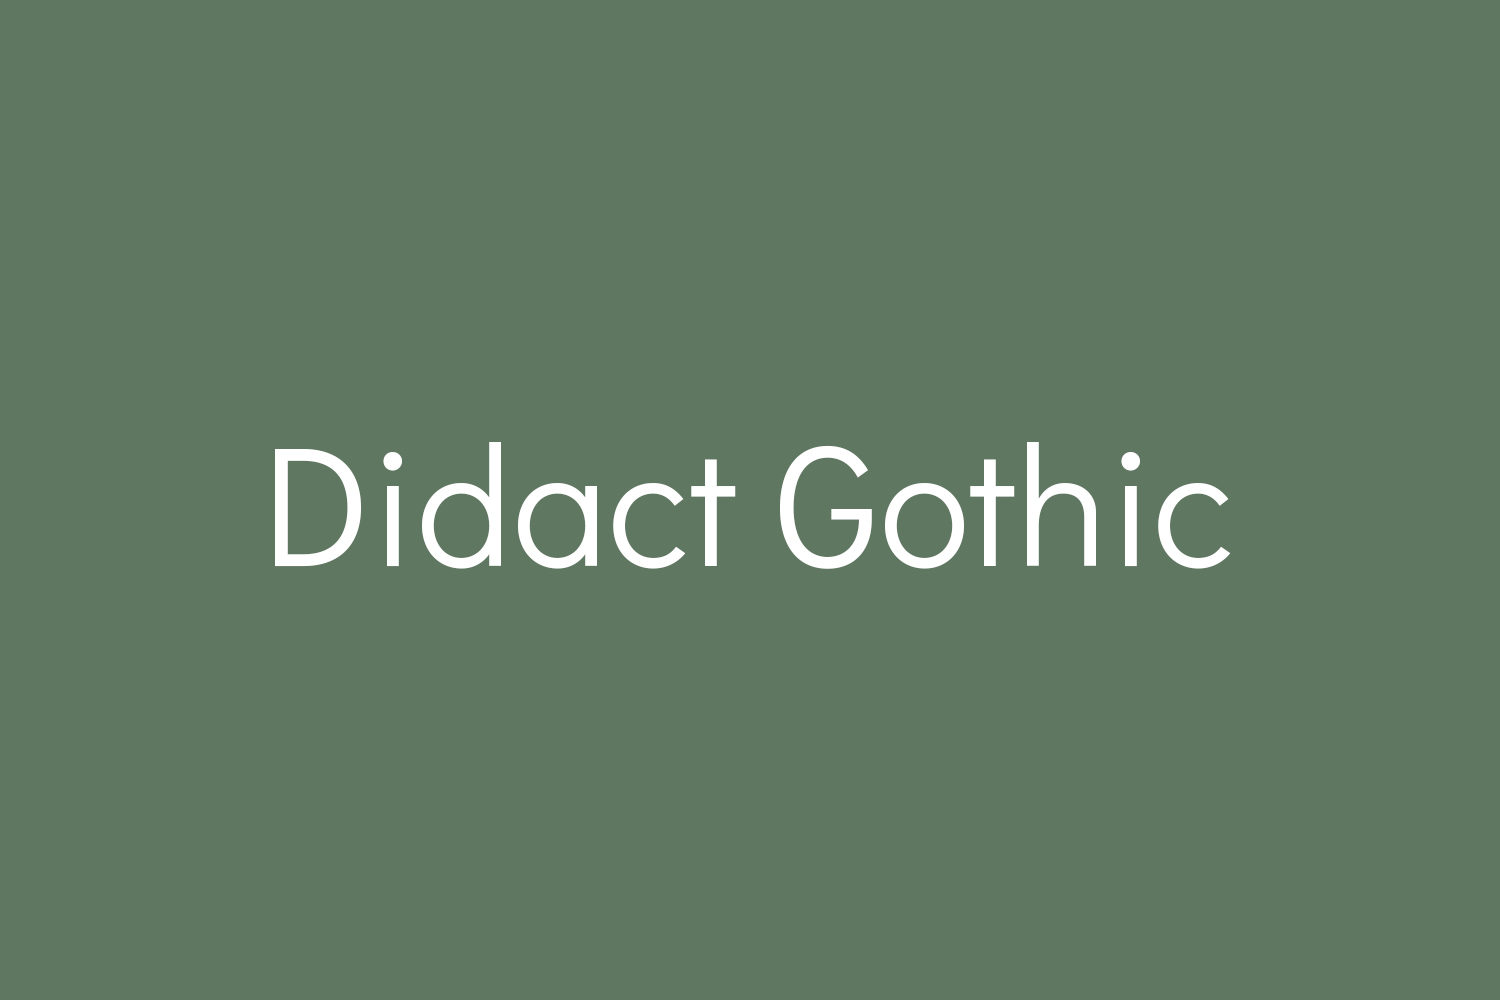 Didact Gothic